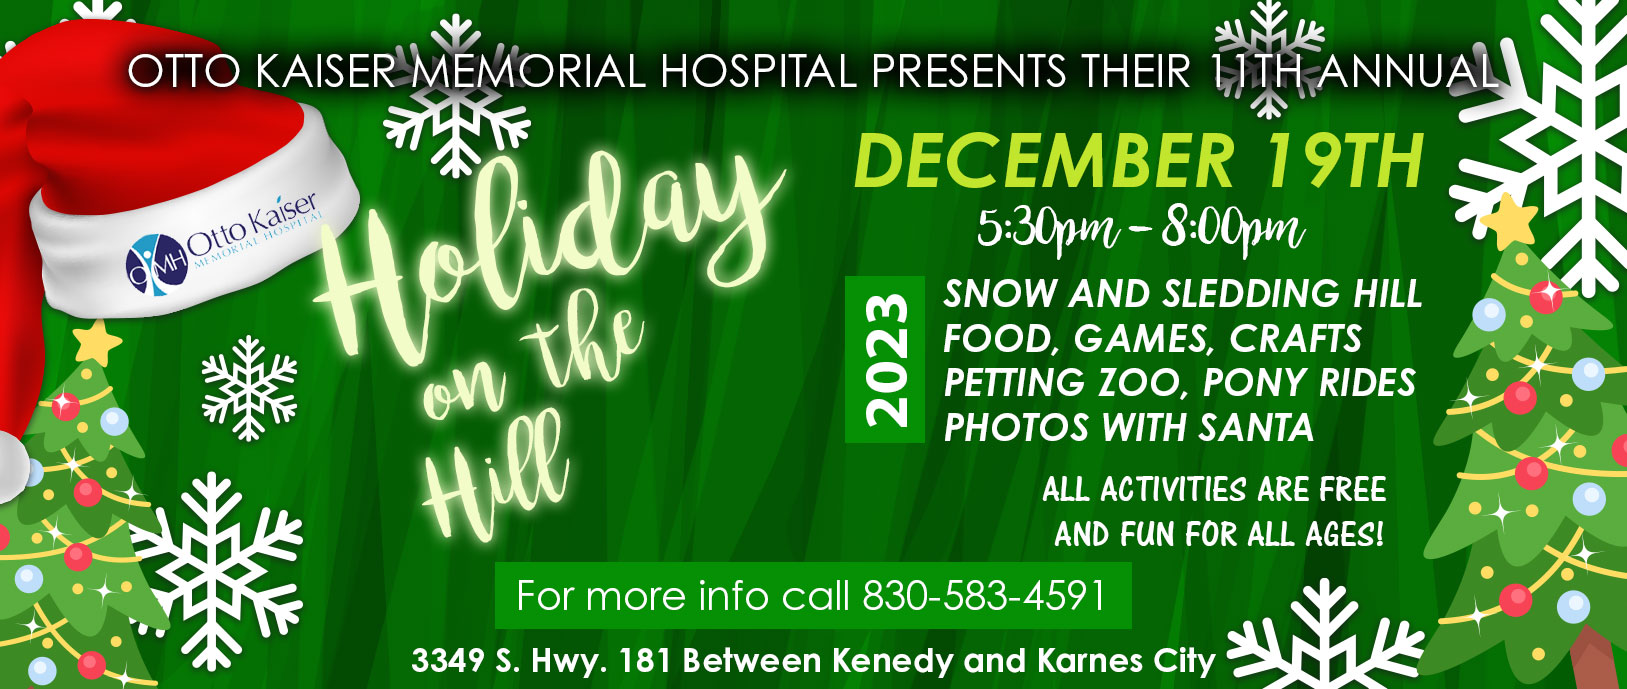 Otto Kaiser Memorial Hospital presents their 11th annual

Holiday on the Hill

December 19th

Snow and sledding hill, food, games, crafts, petting zoo, pony rides, photos with Santa

All activities are free and fun for all ages!

For more info call 830-583-4591